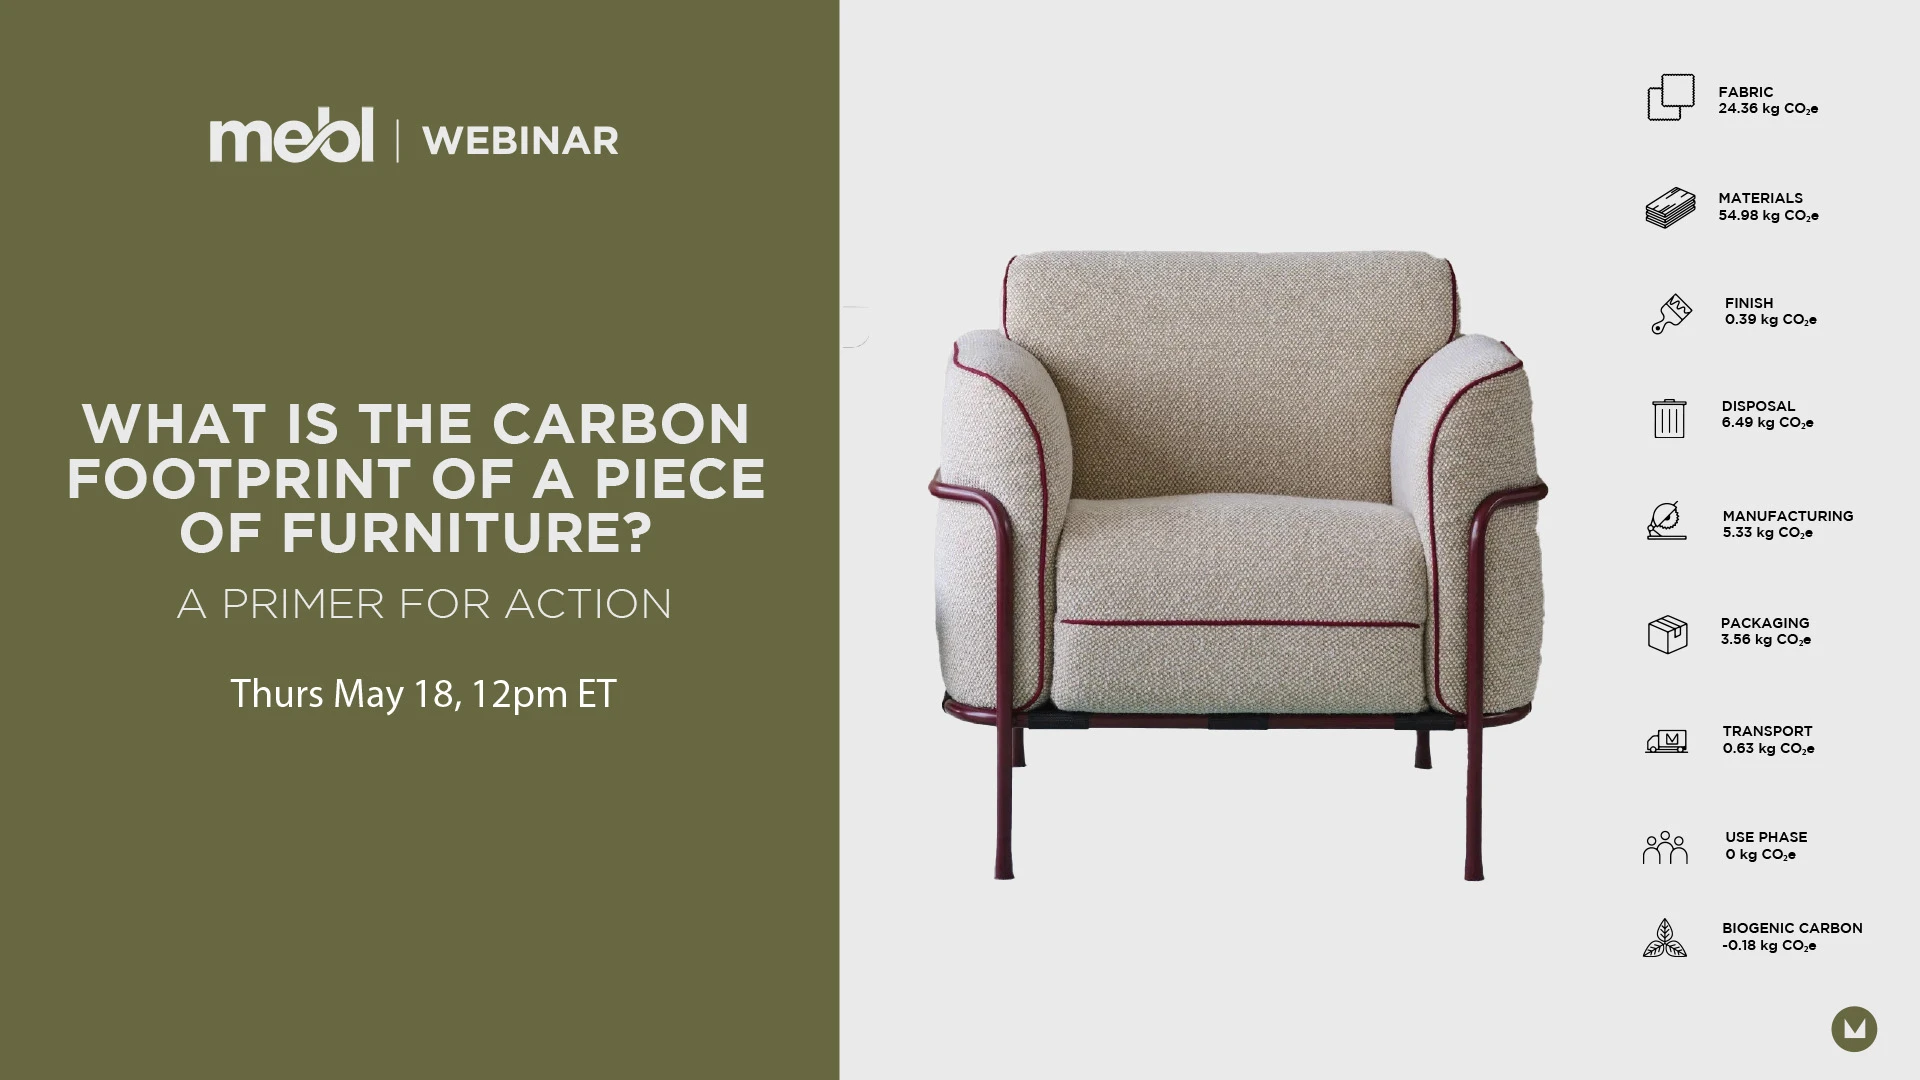 What is the Carbon Footprint of a Piece of Furniture? A Primer for Action WEBINAR hosted by mebl transforming furniture. 